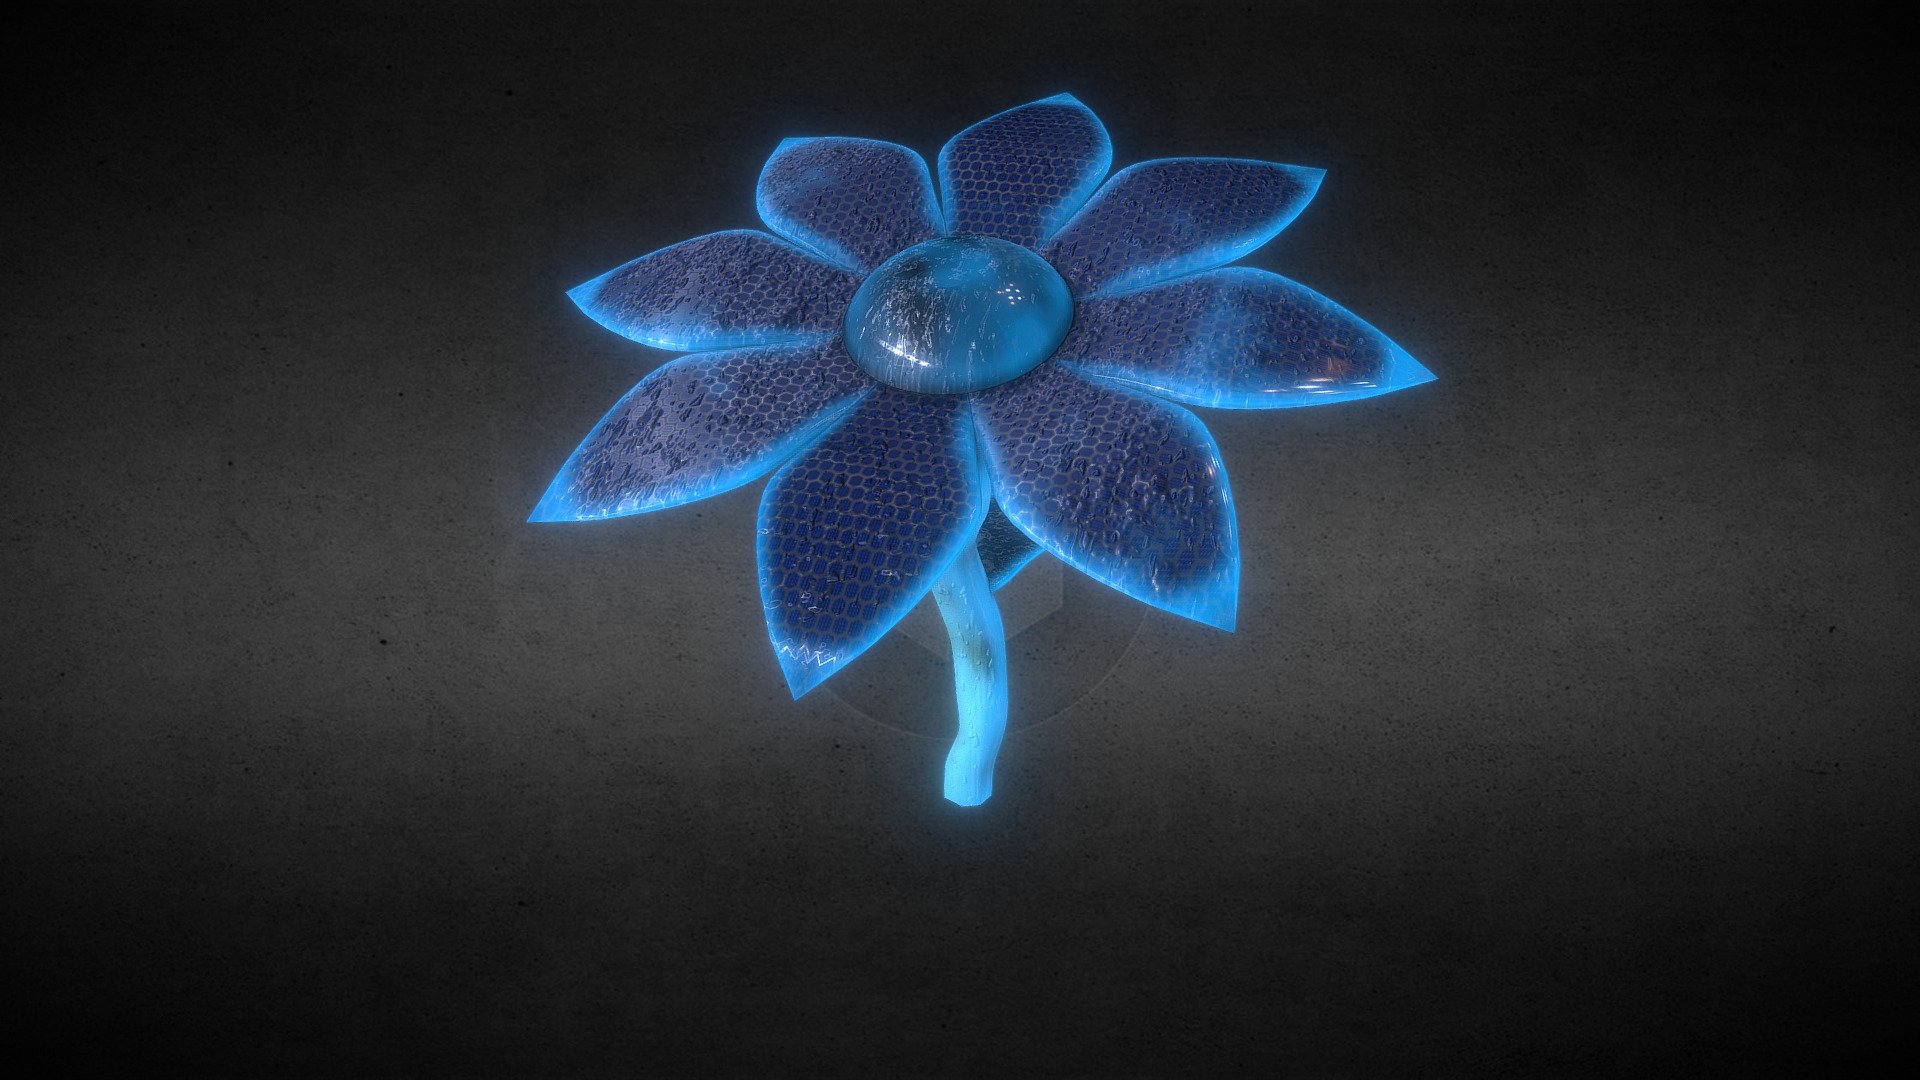 This flower was made in Maya as part of my NRC assignment, the client of our brief was Blizzard and I created this flower as part of a set of models that I later combined into a full scene in Unity.

The textures were put together using Substance Painter.

This flower’s lore is essentially that it can harness energy from any light sources it was built by an evil corperation that has domination over the entire universe, the flower can redistribute the power of artifical black holes as well 3d model